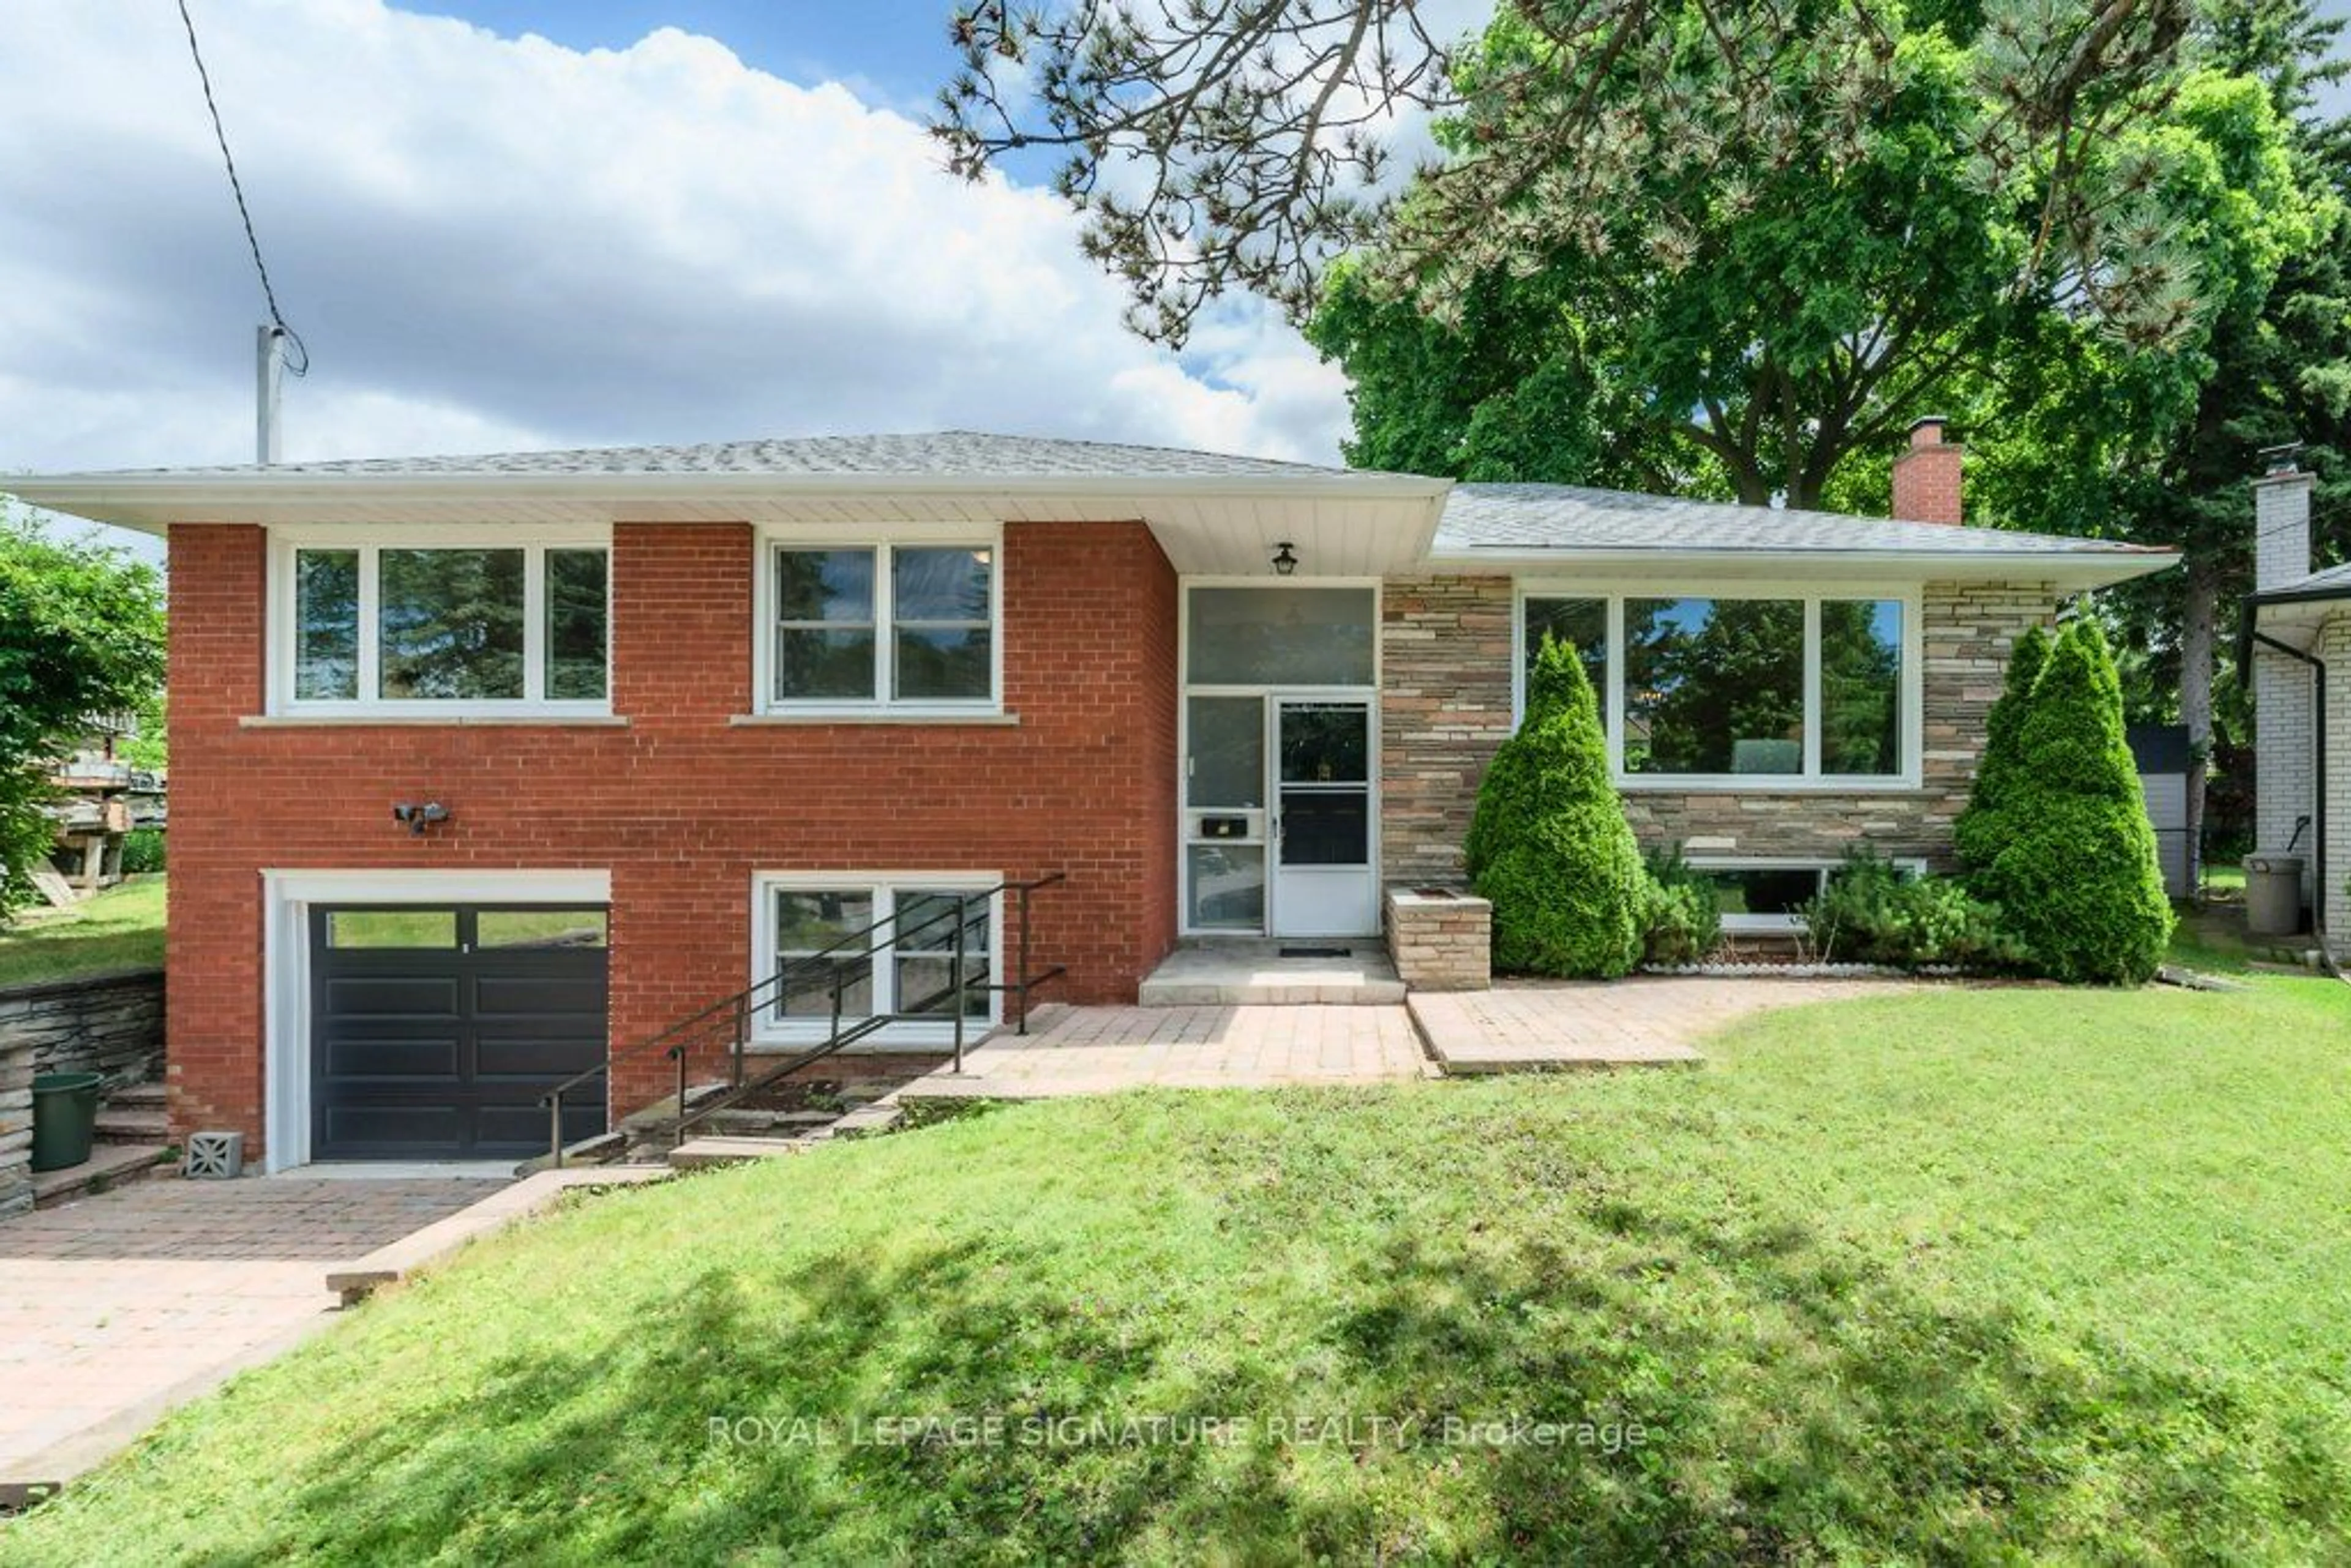 Home with brick exterior material for 12 DONEWEN Crt, Toronto Ontario M4A 1P8